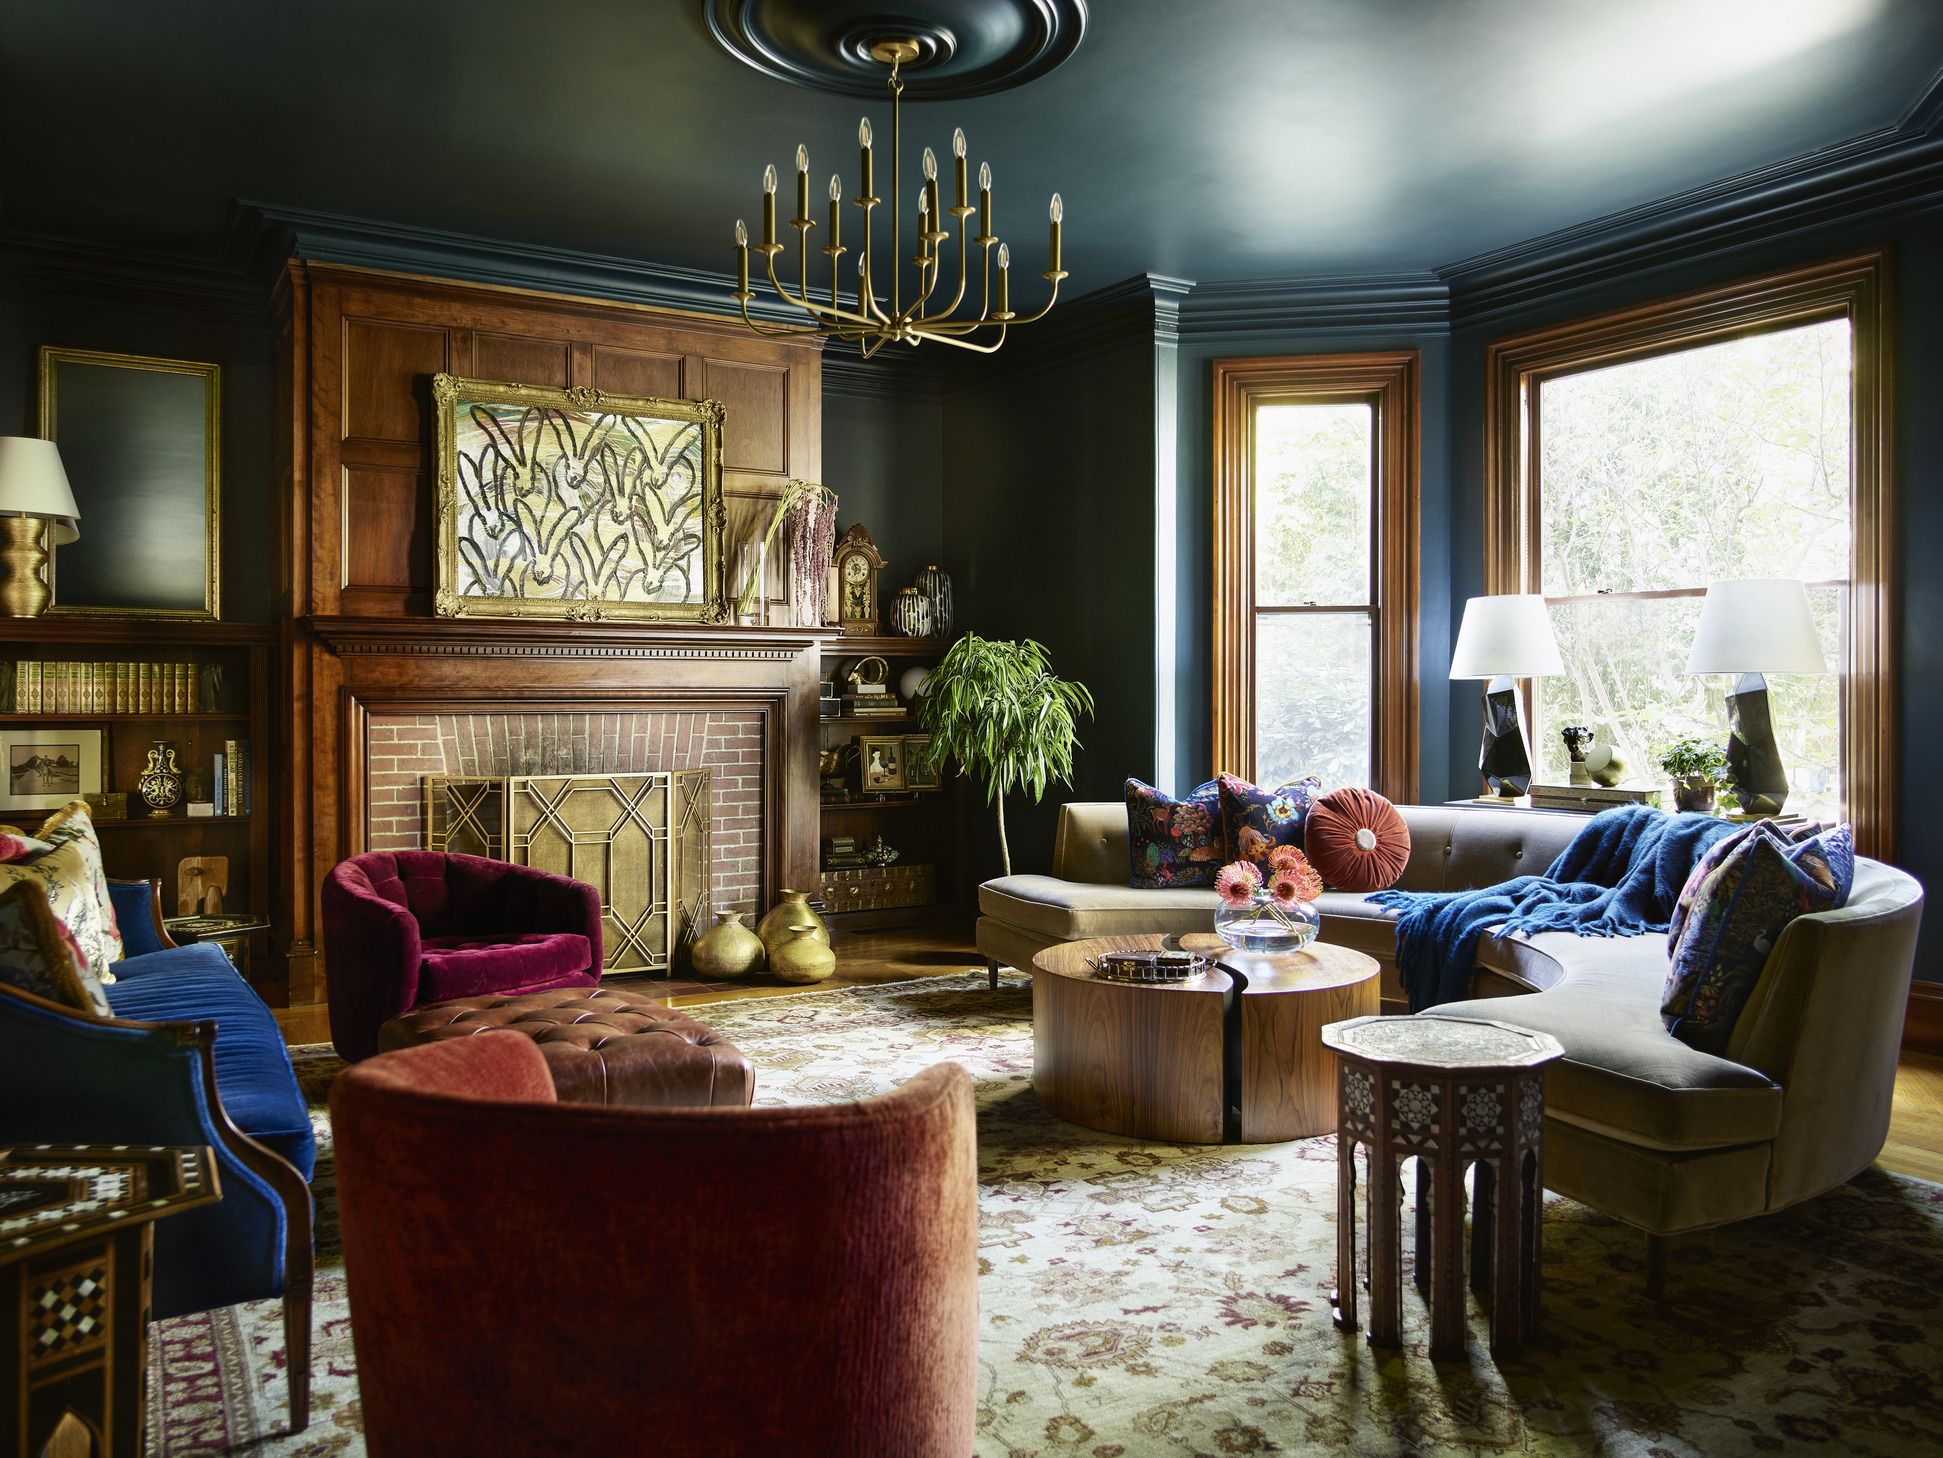 Timeless Dark Green Paint Colors to Try at Home - Building Bluebird